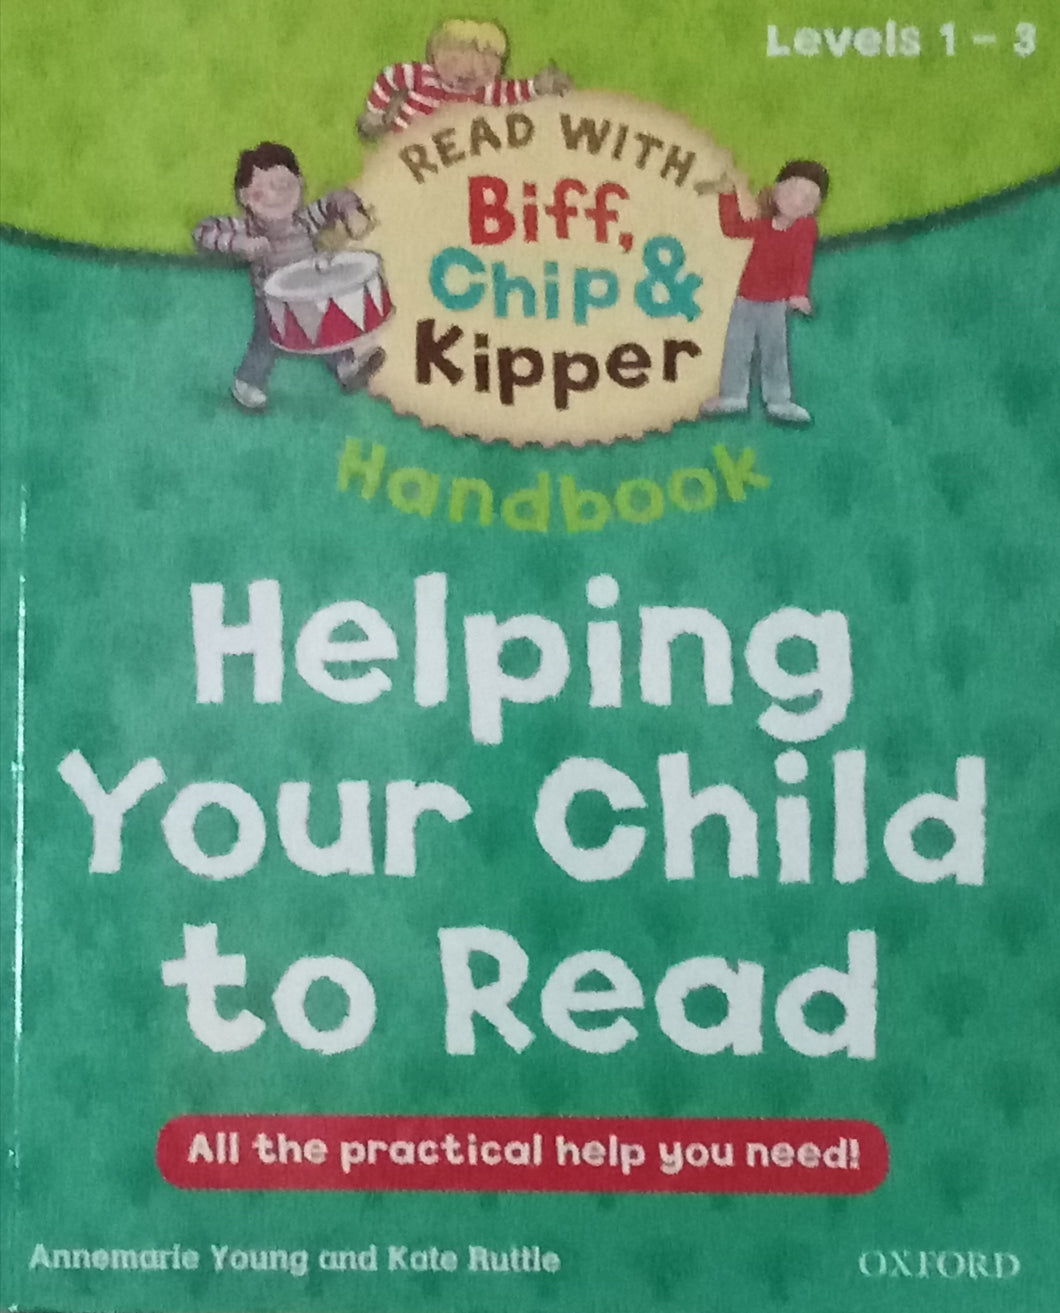 Read With Biff, Chip and Kipper: Helping Your Child to Read